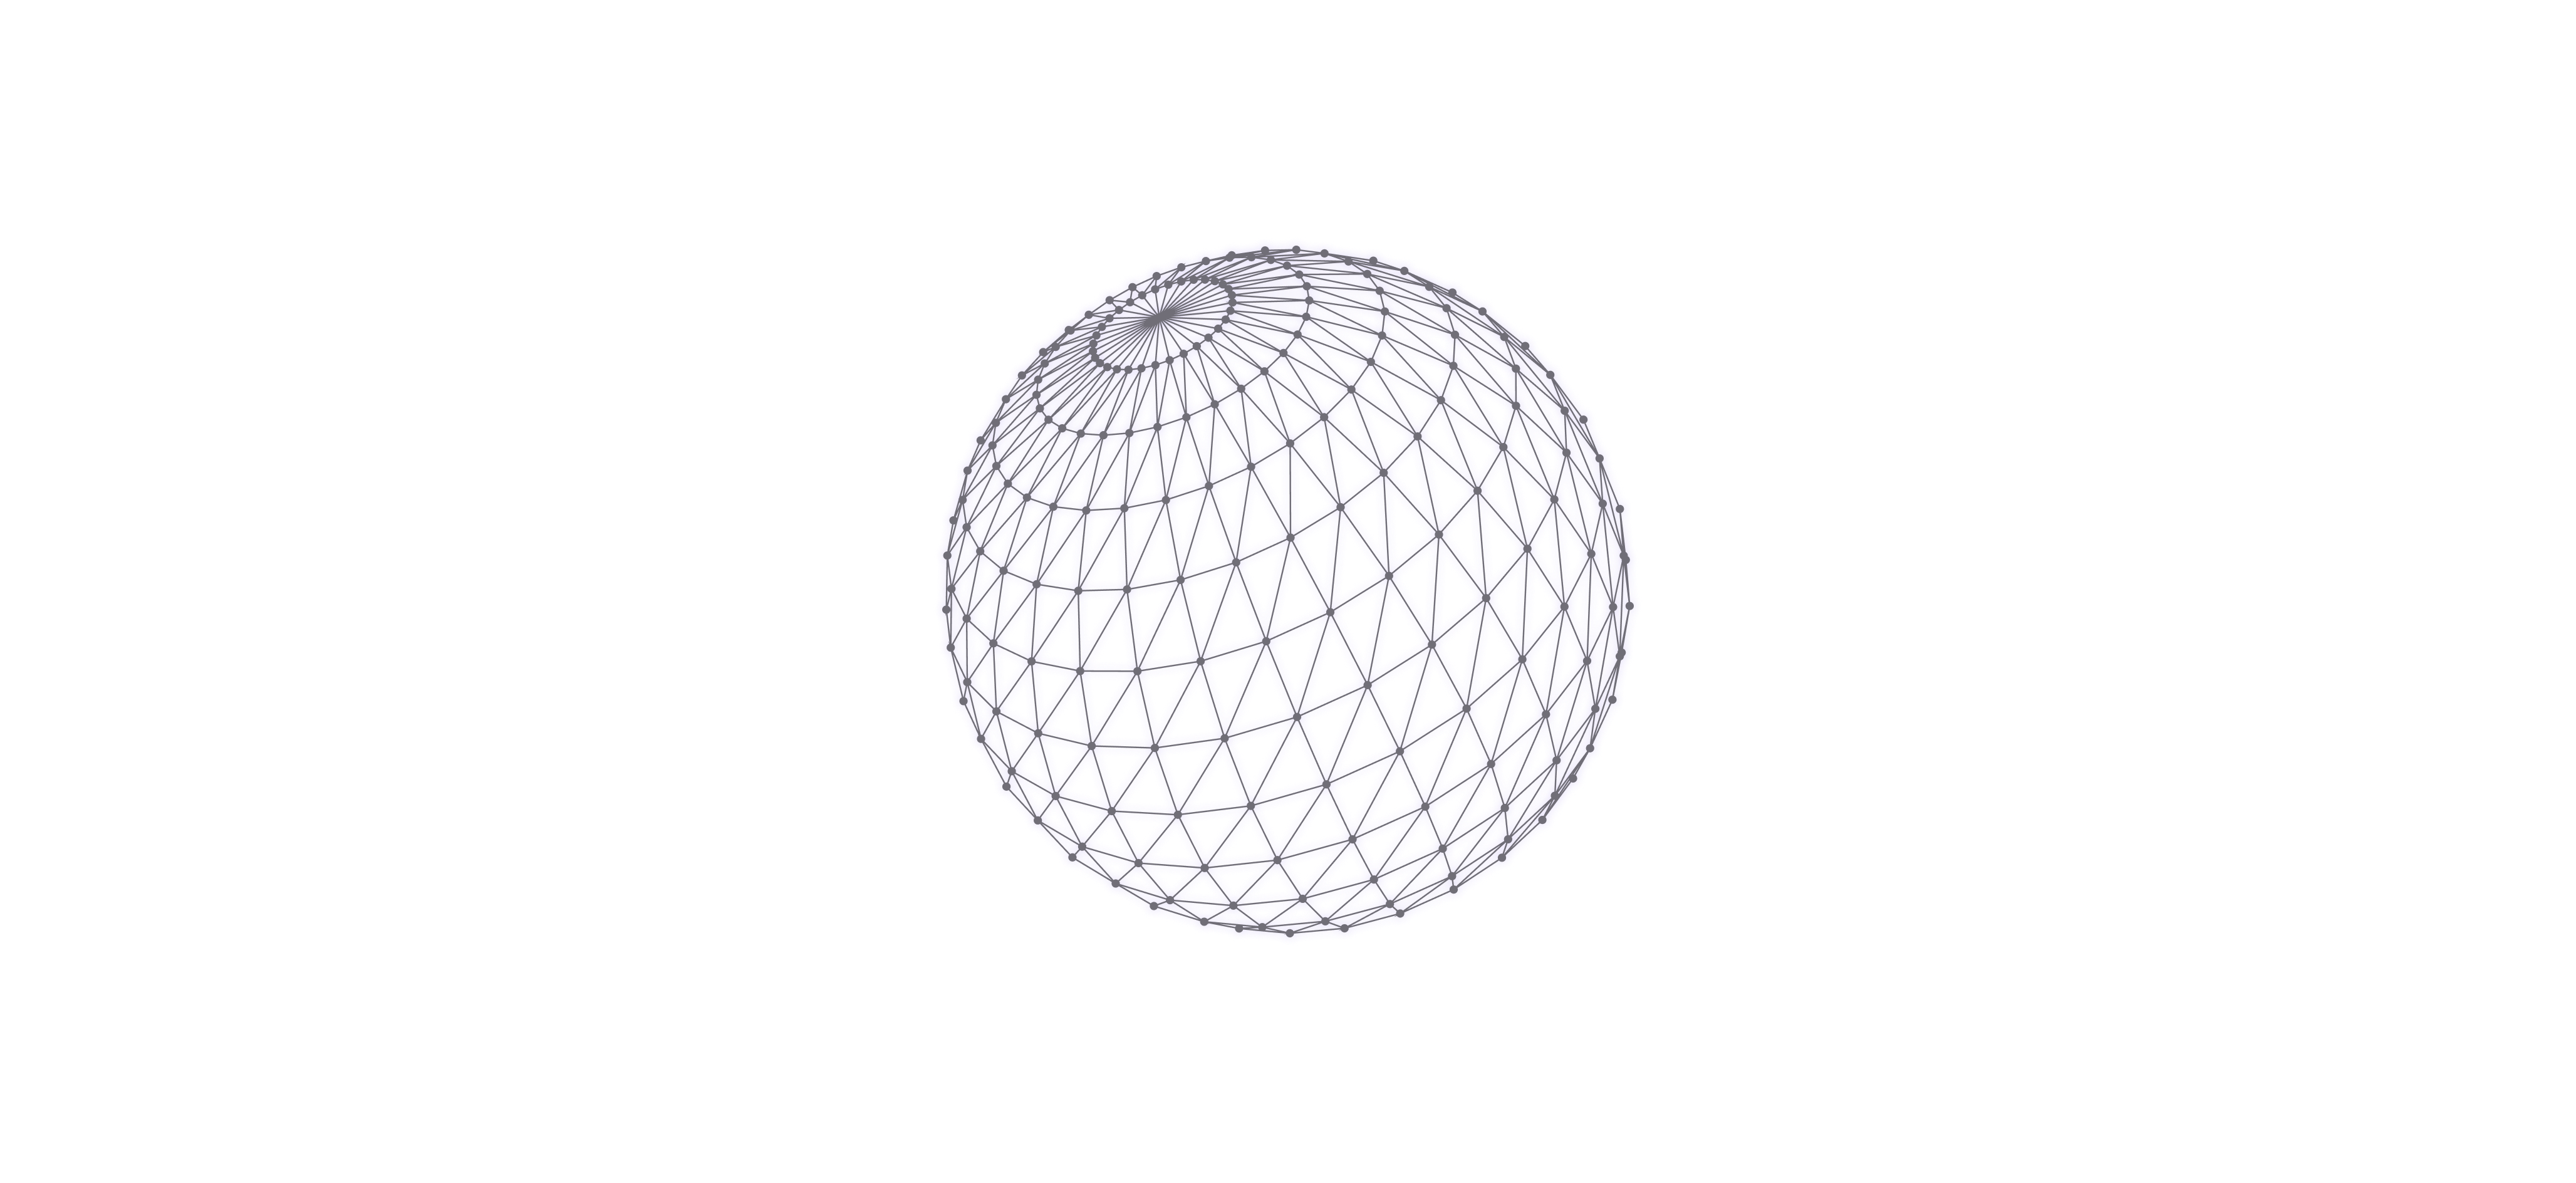 An illustration of a globe with connected dots